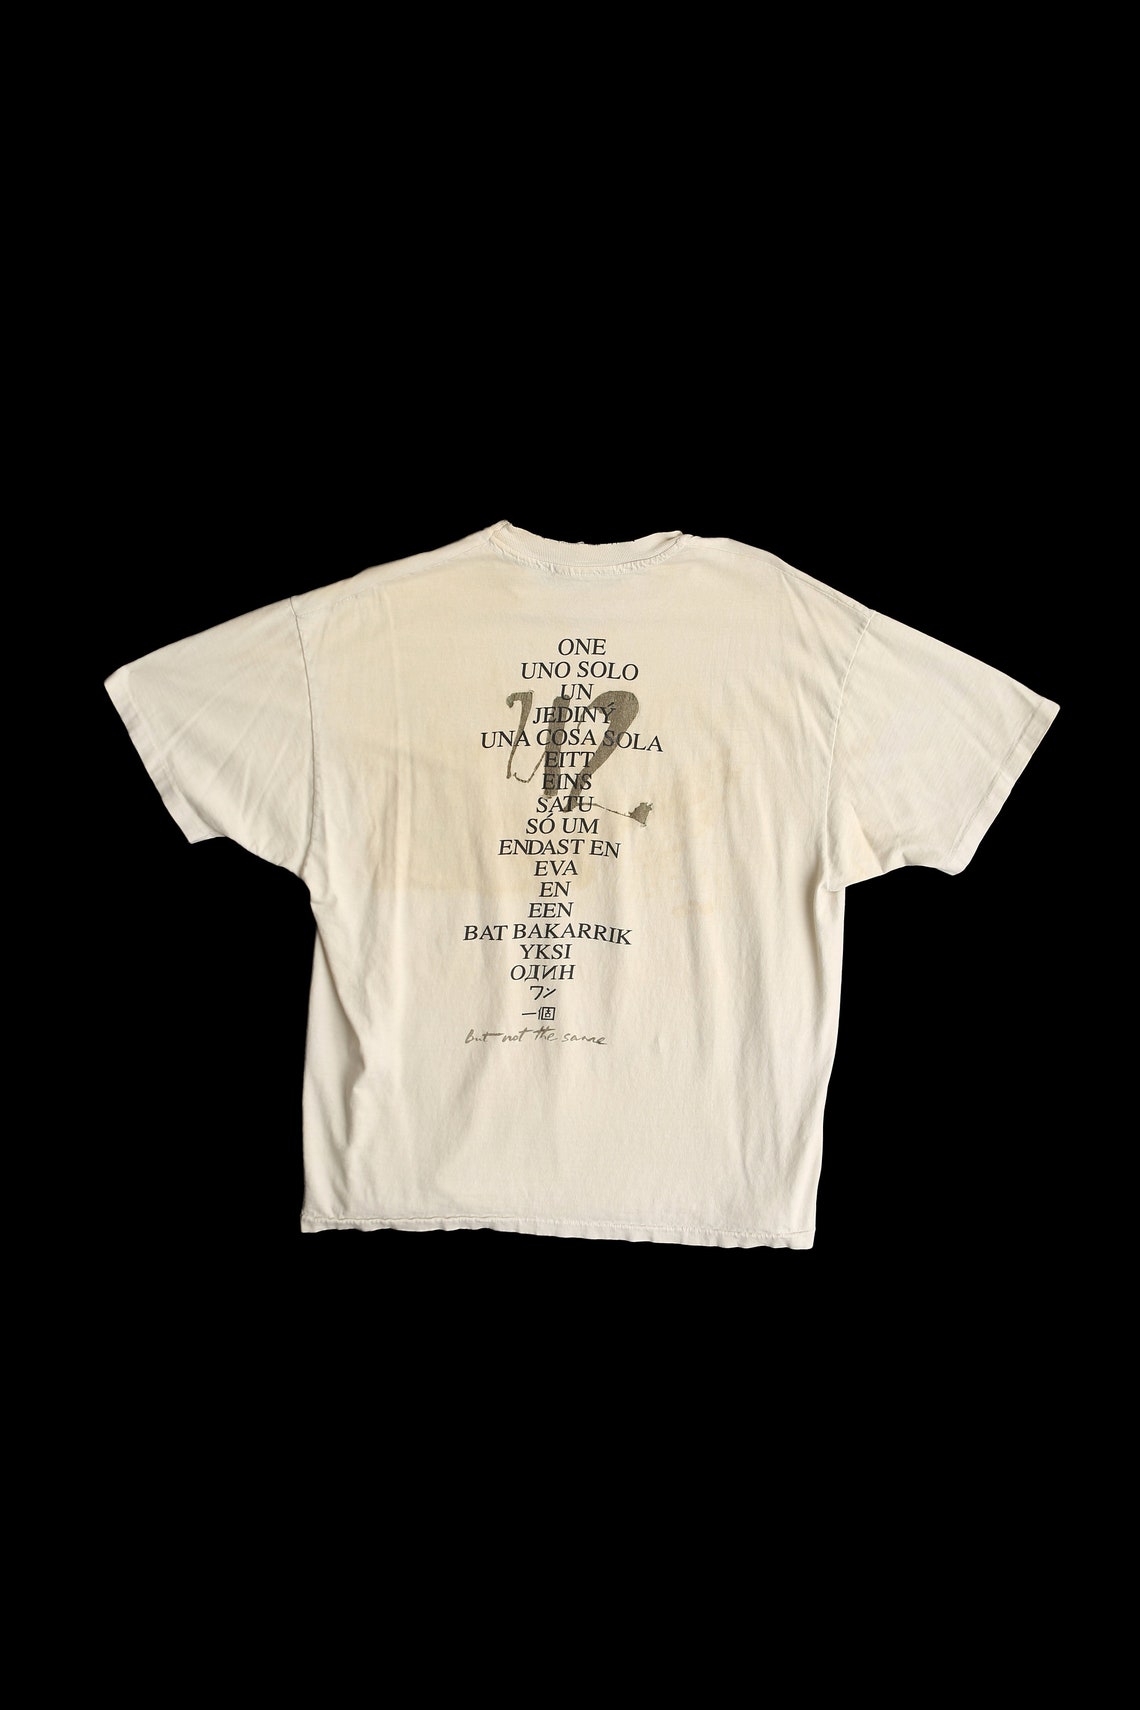 Vintage U2 One T-shirt Smell the Flowers While You Can - Etsy